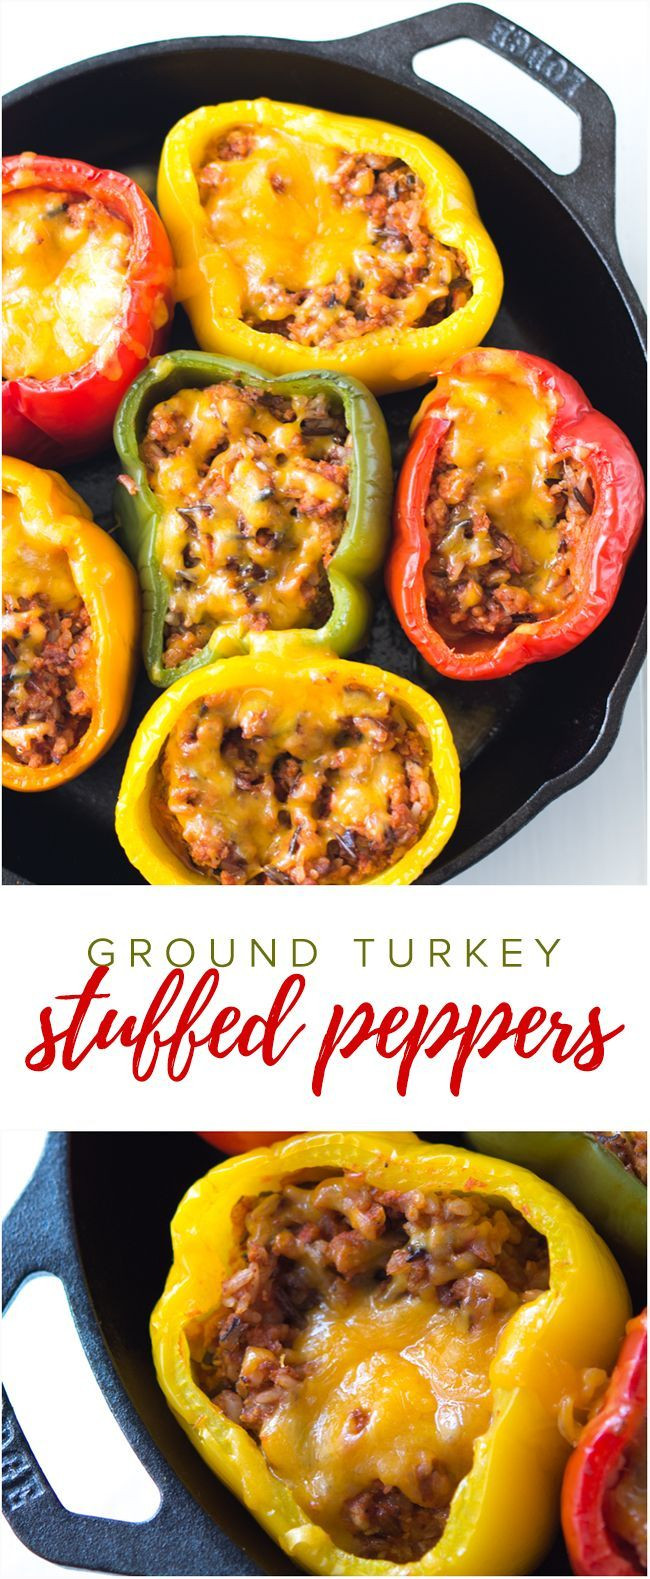 Easy To Make Healthy Dinners
 Best 25 Healthy Recipes ideas on Pinterest